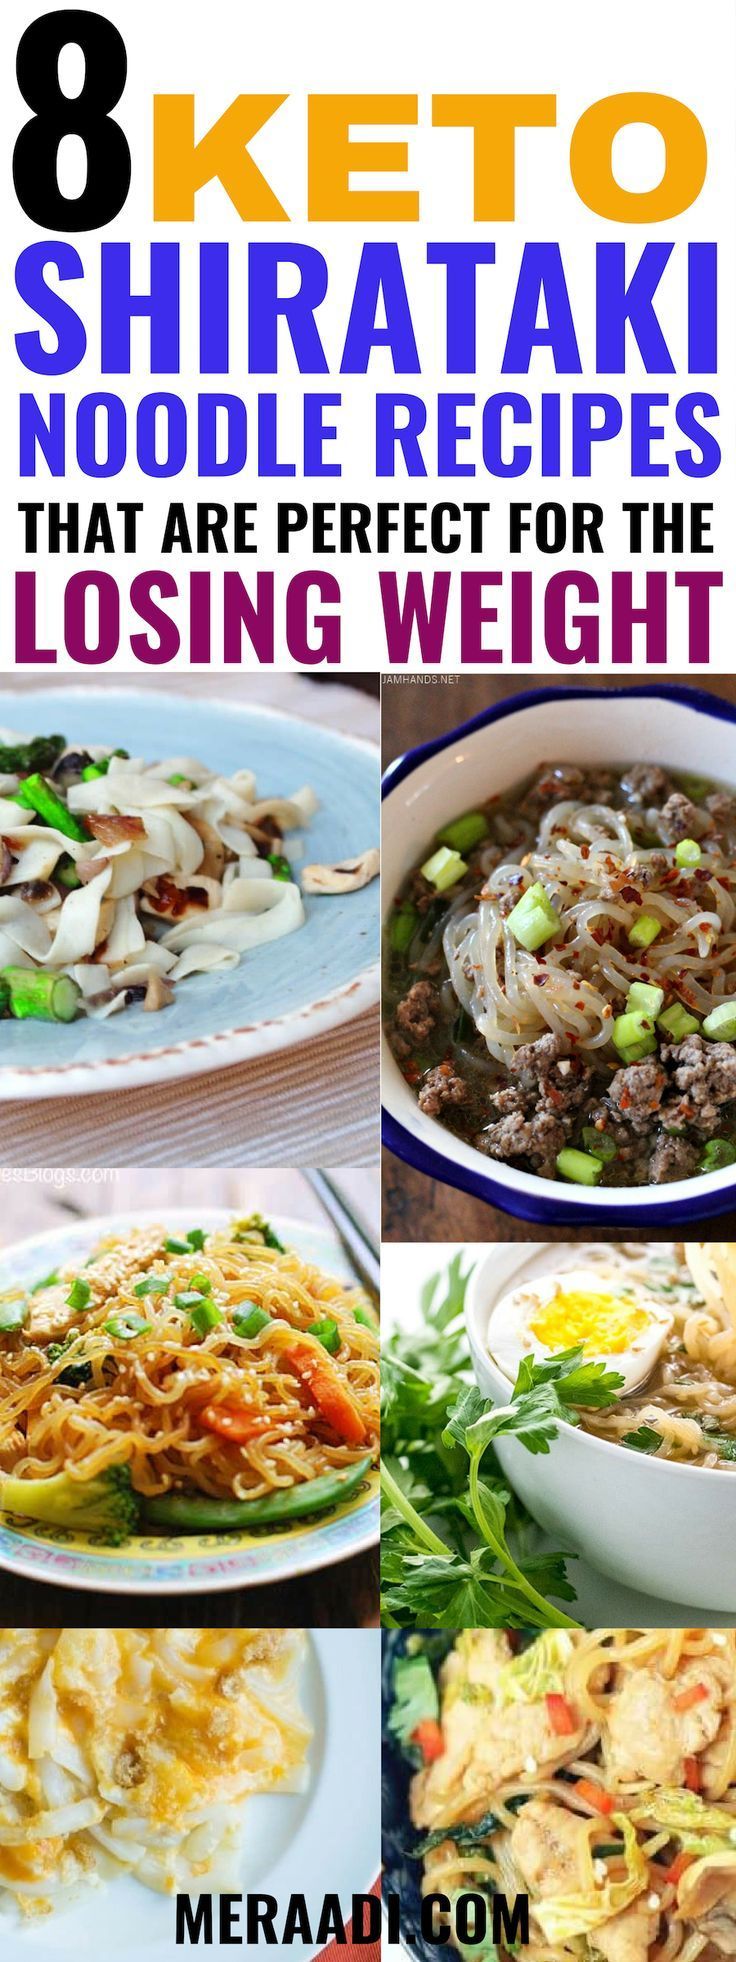 8 Amazing Shirataki Noodle Recipes You Need To Try On The Keto Diet -   16 lunch recipes noodles
 ideas